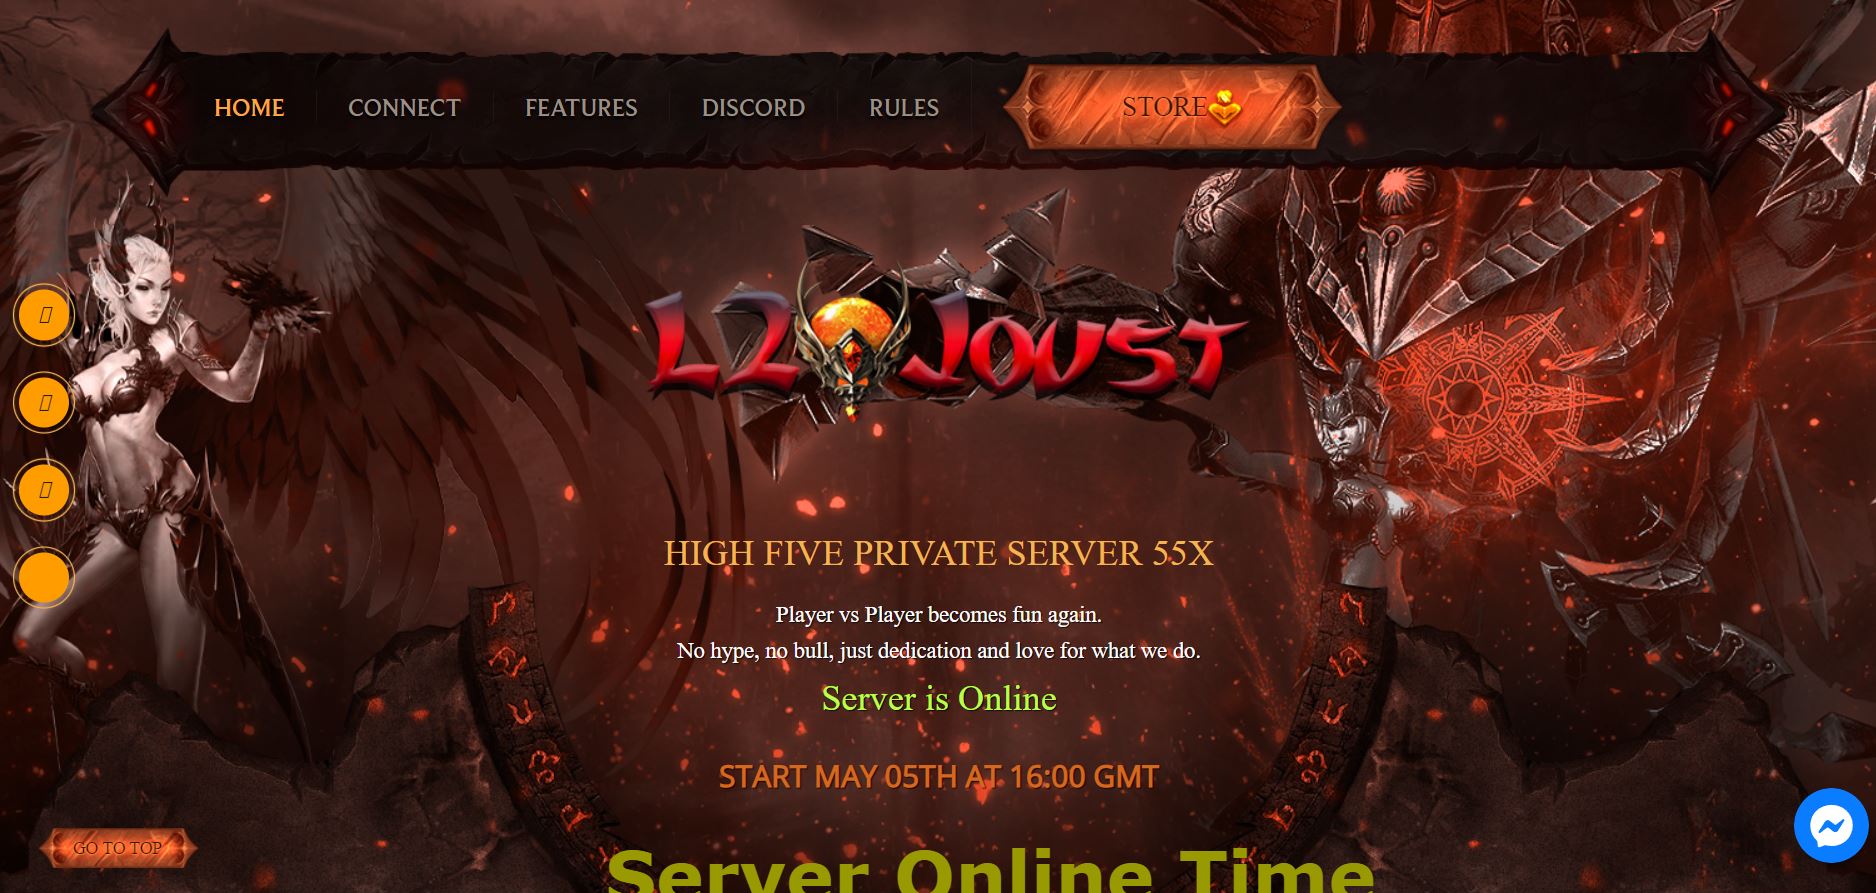 🌟 L2Joust.com High Five x55: Join the Battle for Glory! ⚔️🛡️